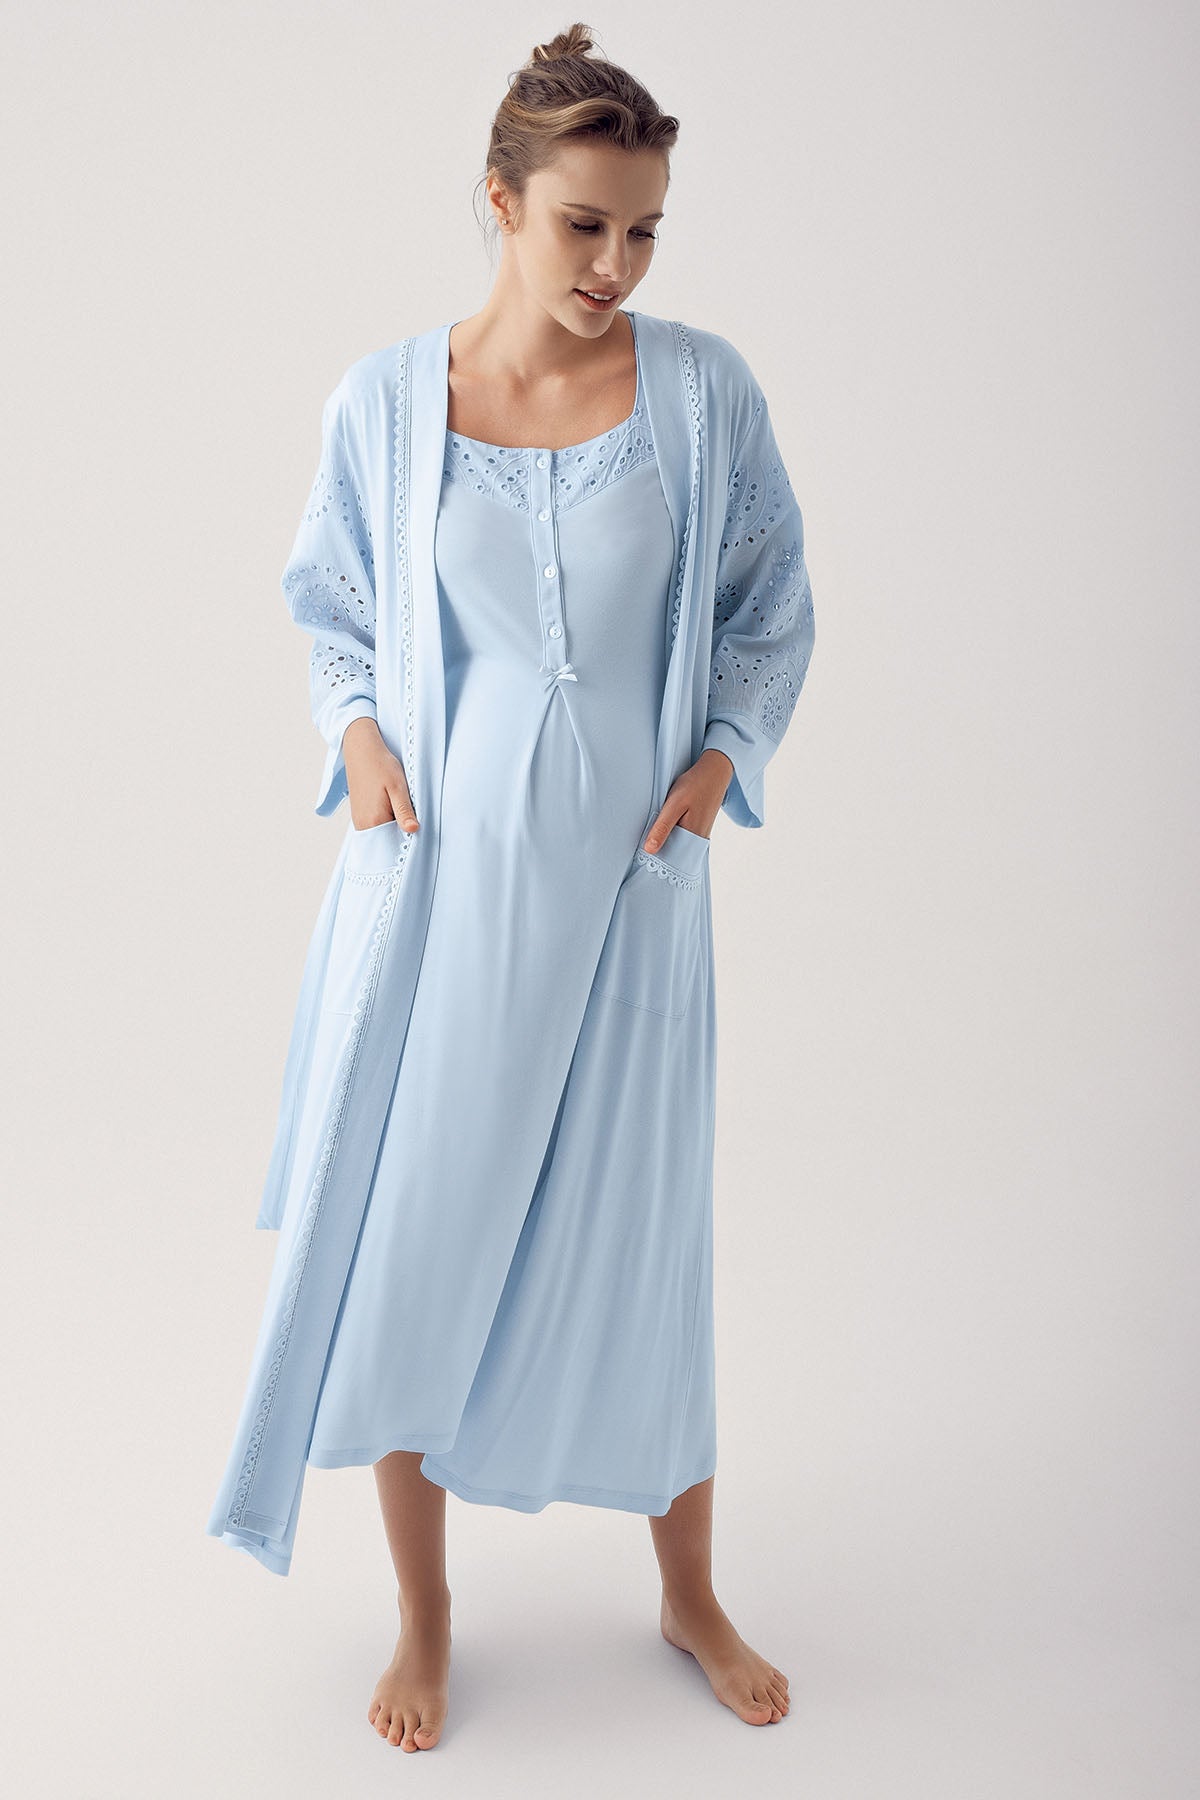 Shopymommy 14400 Motif Embroidered Maternity & Nursing Nightgown With Robe Blue